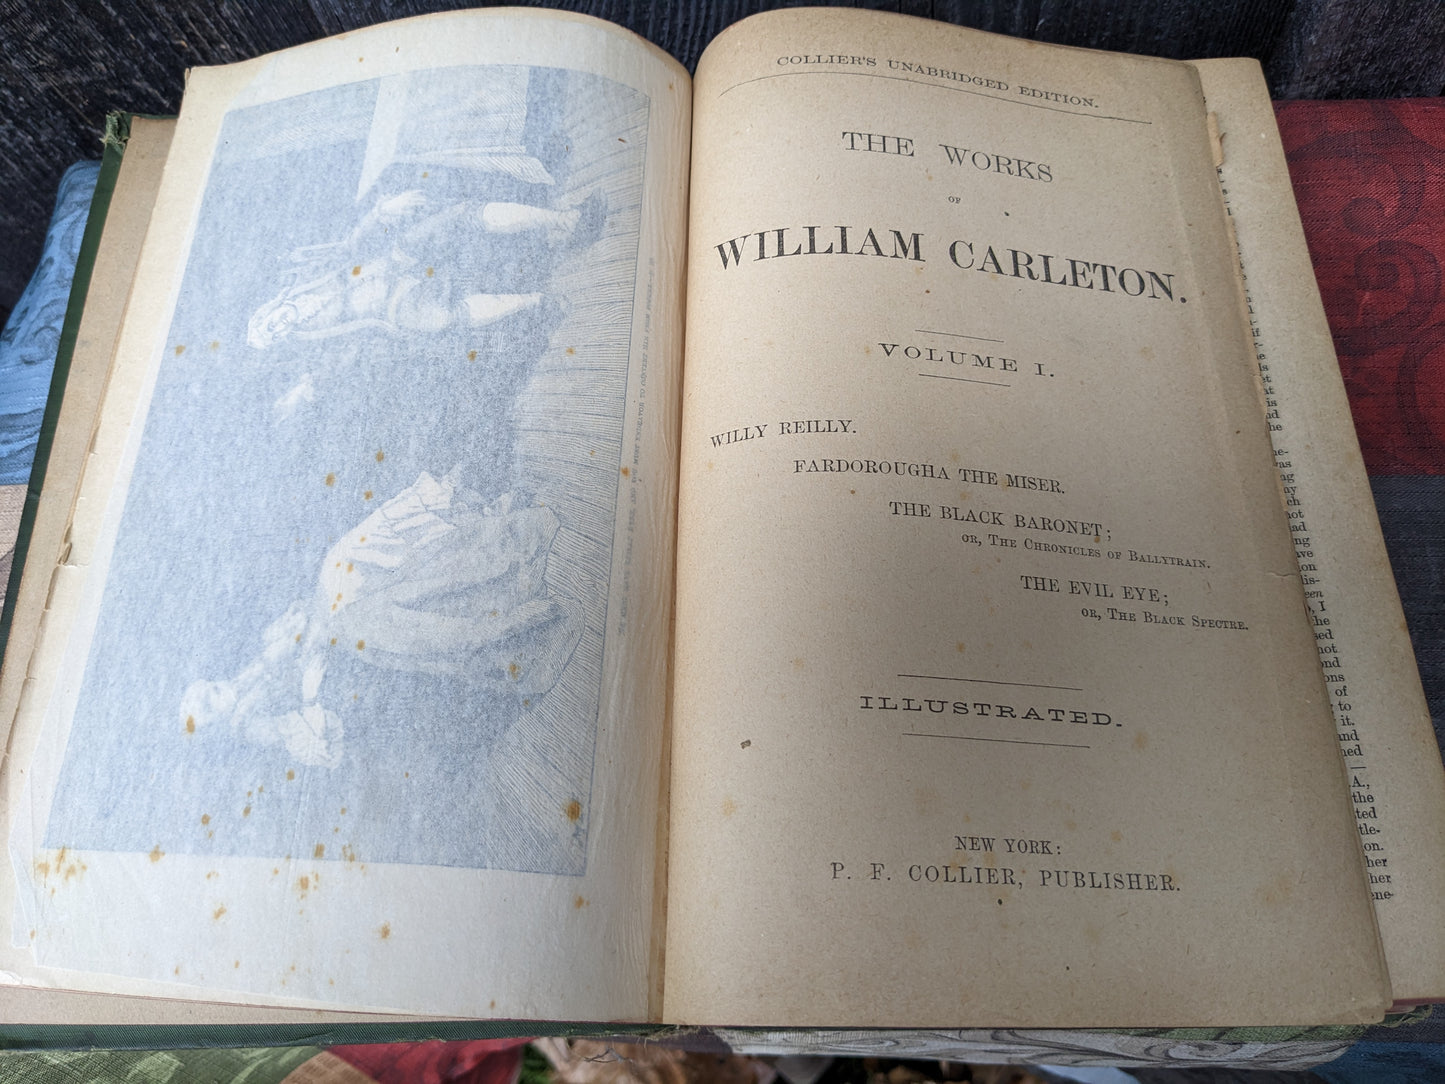 Collier's Unabridged Edition of The Works of William Carleton, Volume I, 1890 Collection